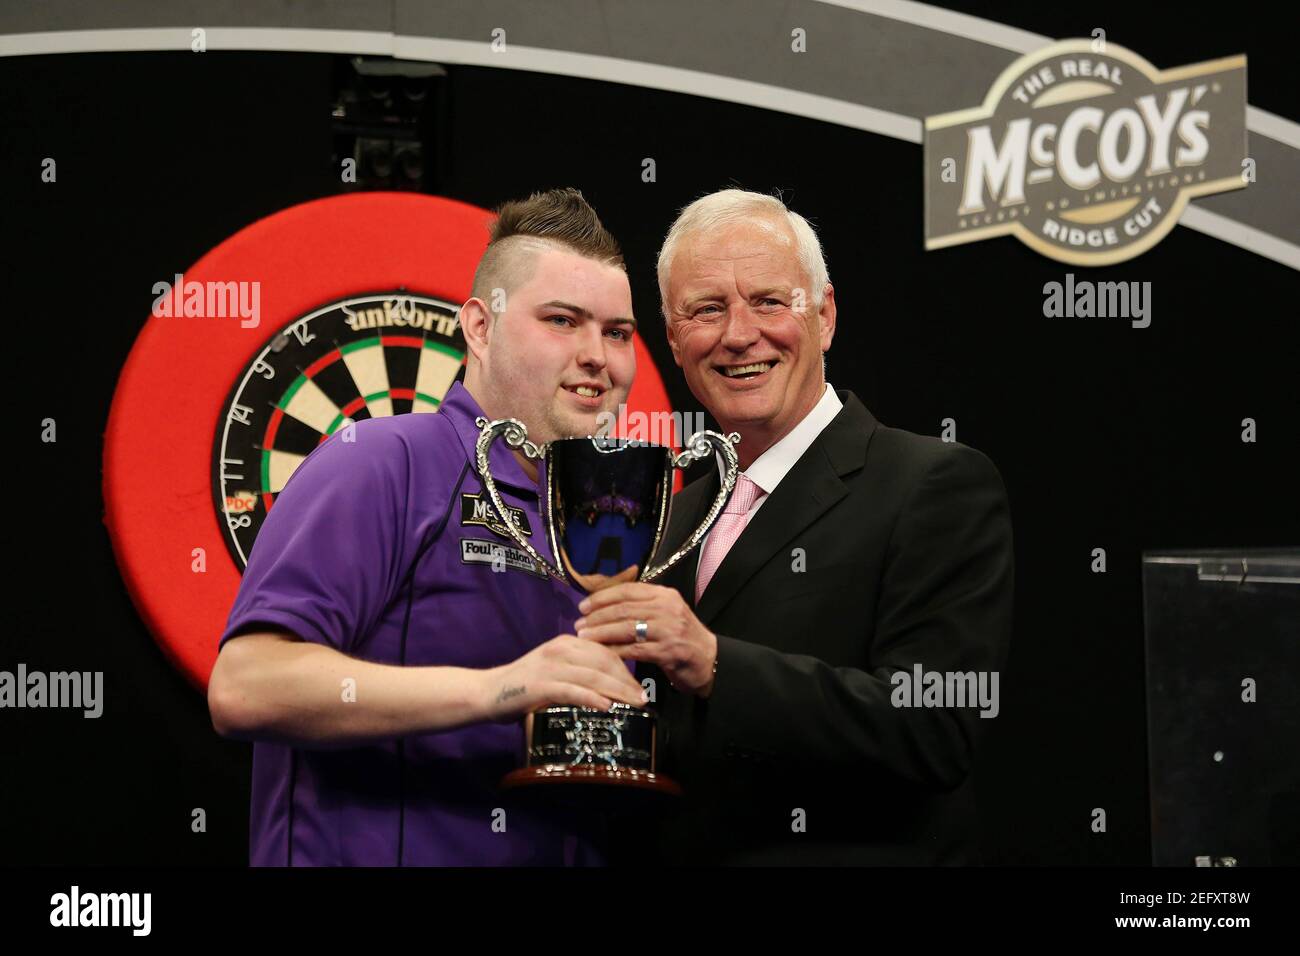 Michael Smith Darts High Resolution Stock Photography and Images - Alamy